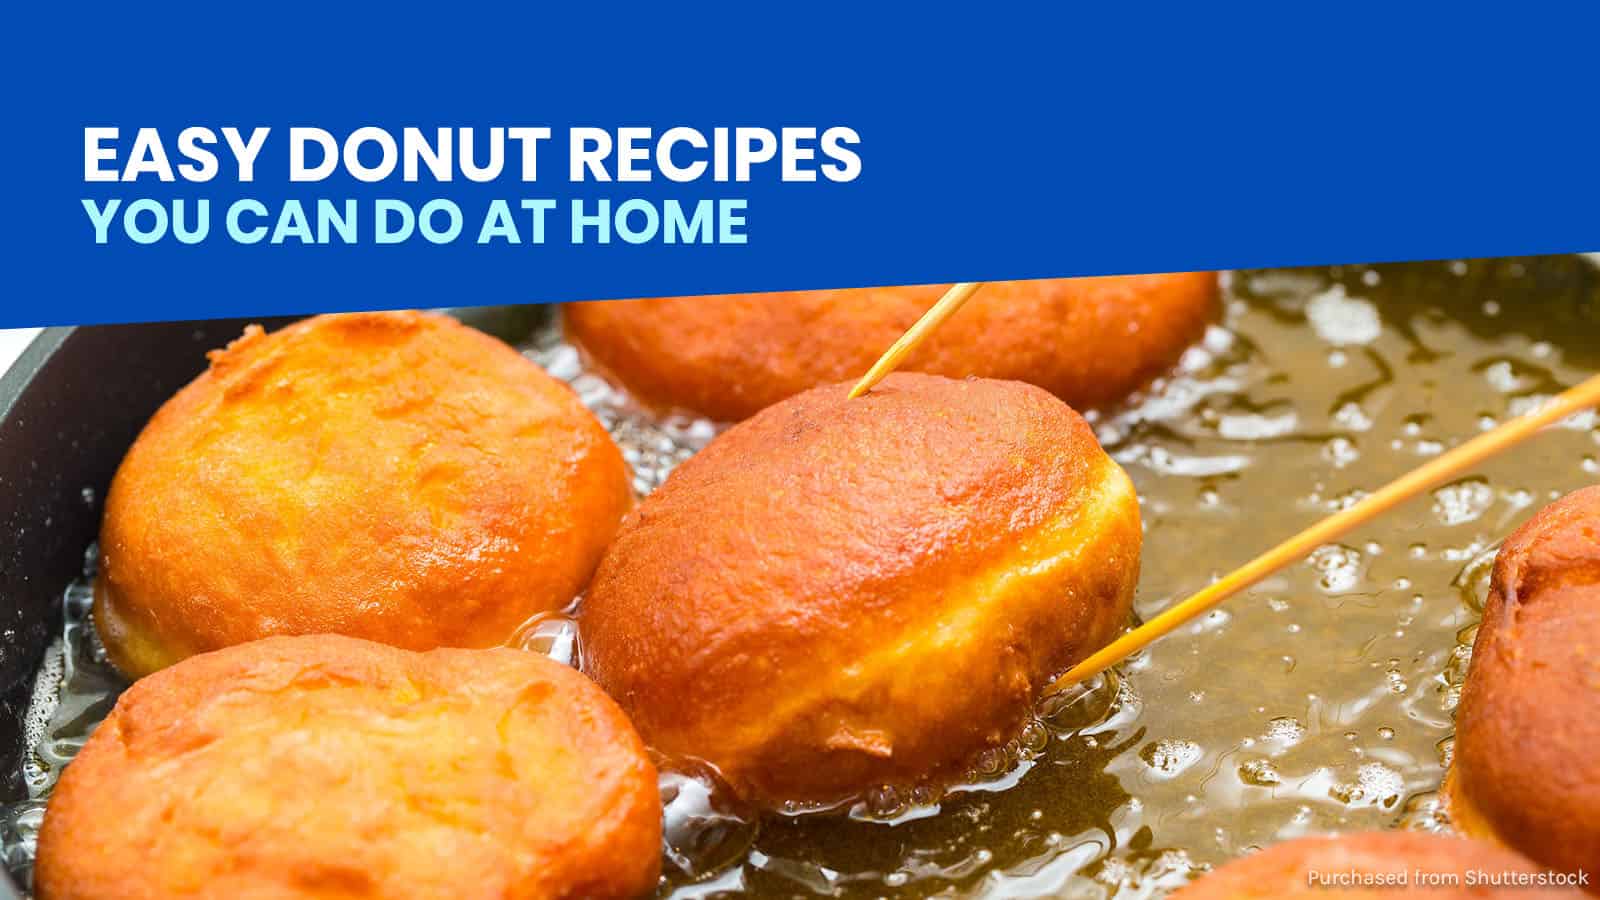 7 Easy DONUT RECIPES You can Try at Home